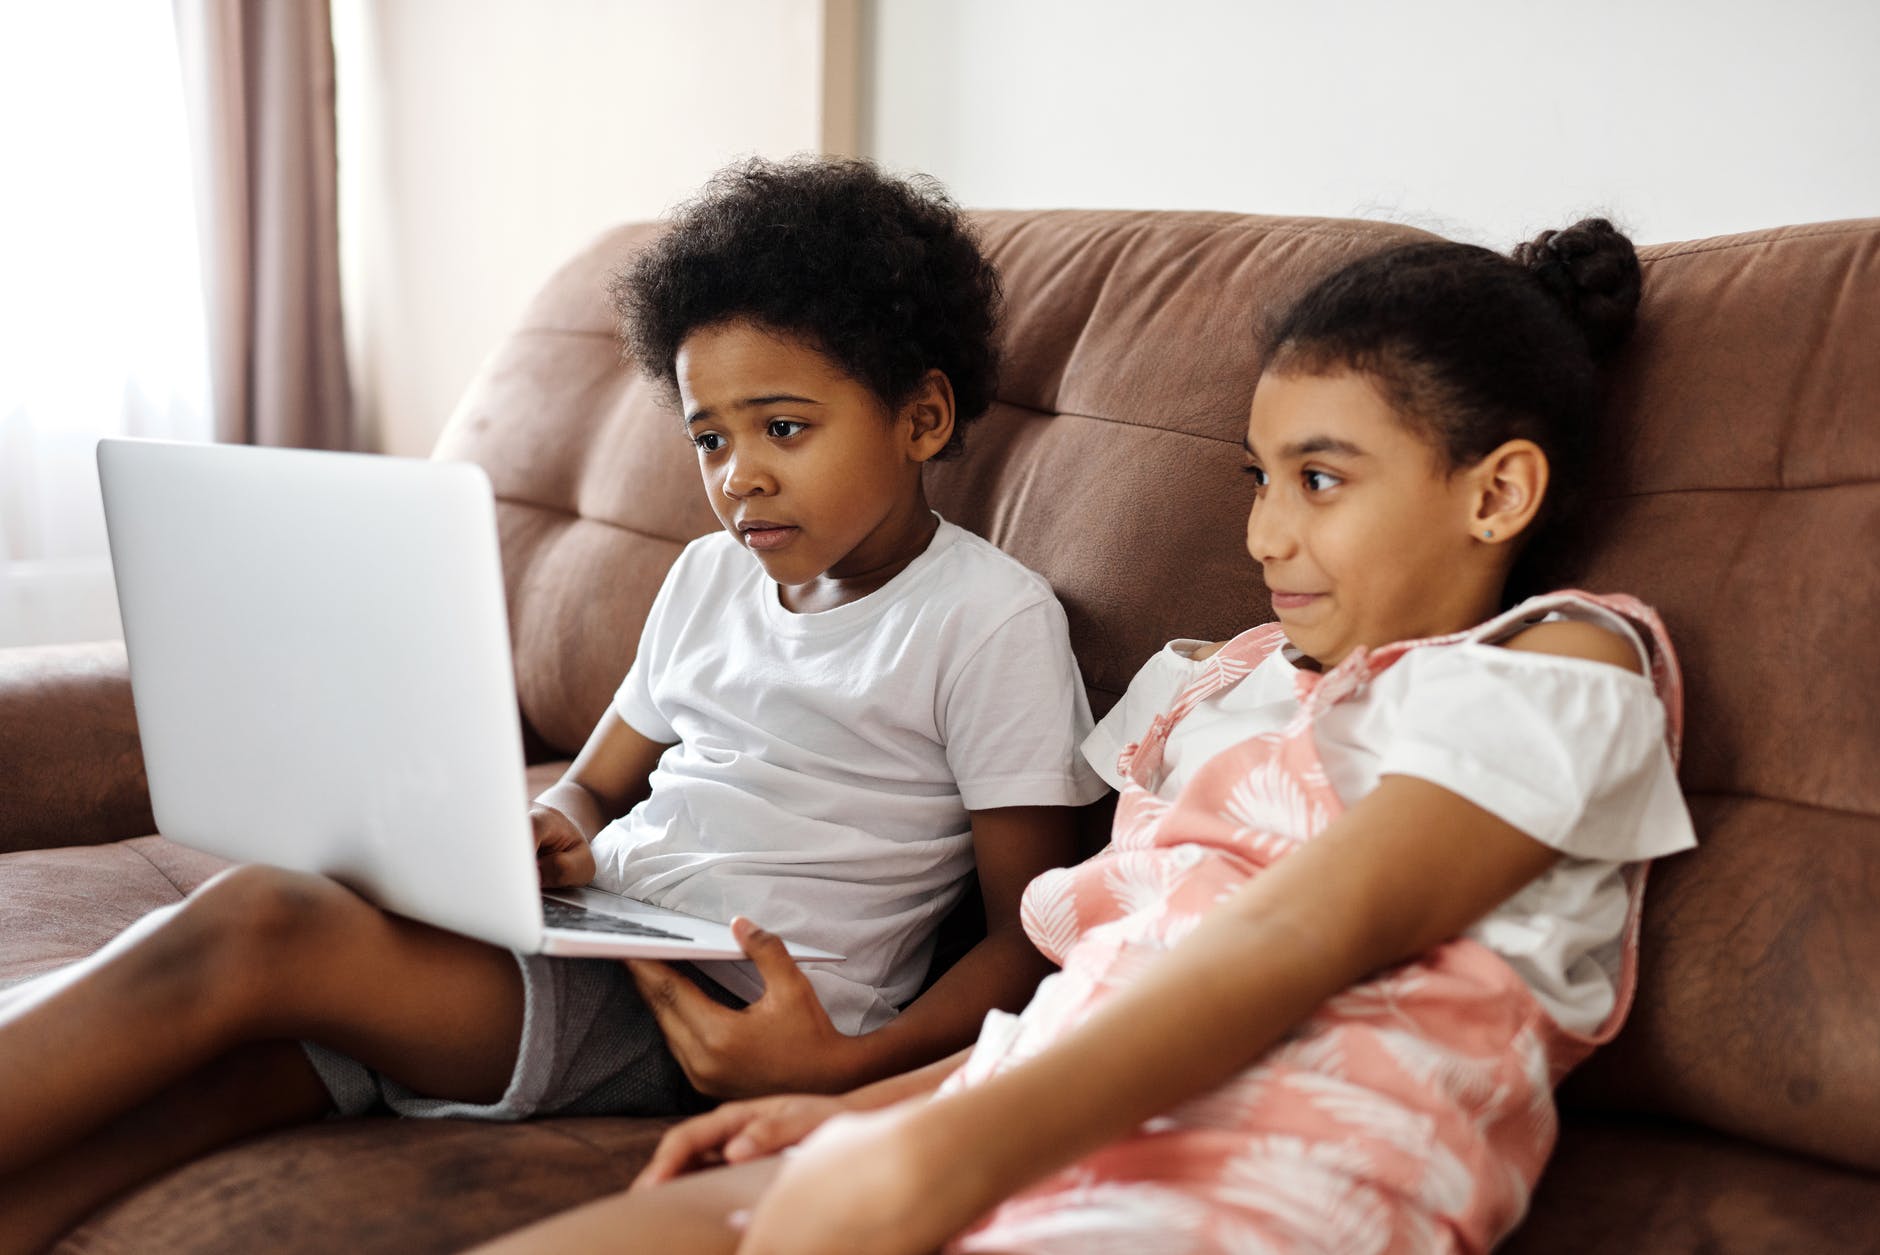 siblings sitting on a couch and looking at a laptop